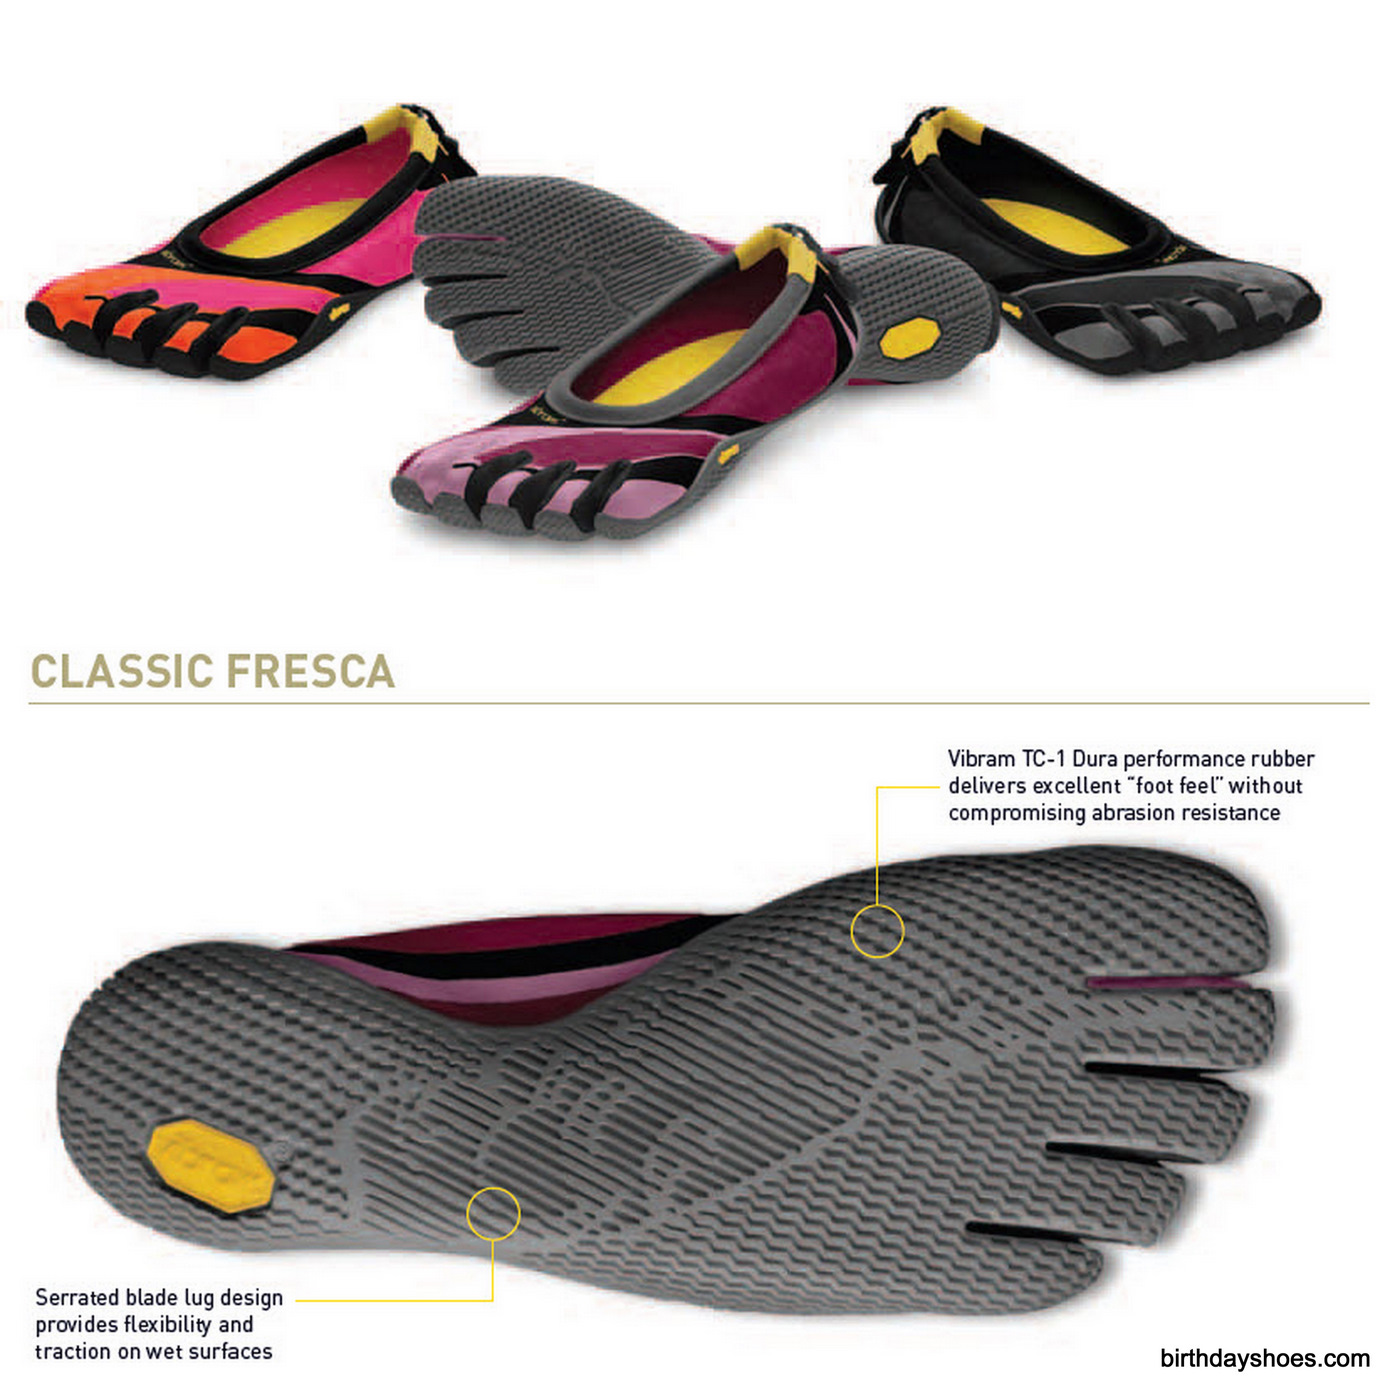 The FiveFingers Classic Fresca is a refresh of the original Classic FiveFingers model with a new sole - for women only.